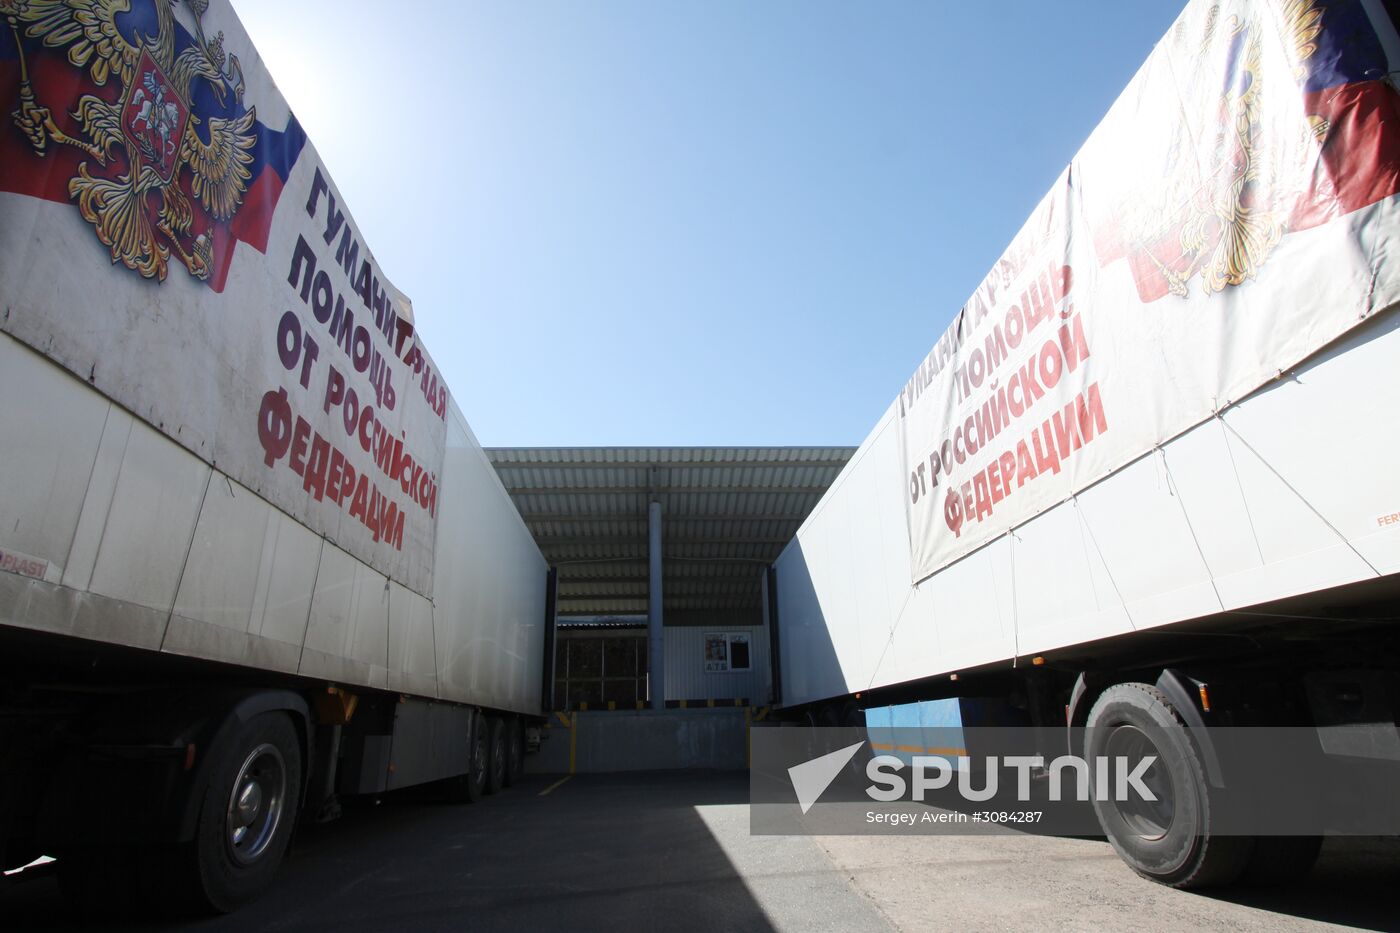 Russia's humanitarian convoy arrives in Donetsk